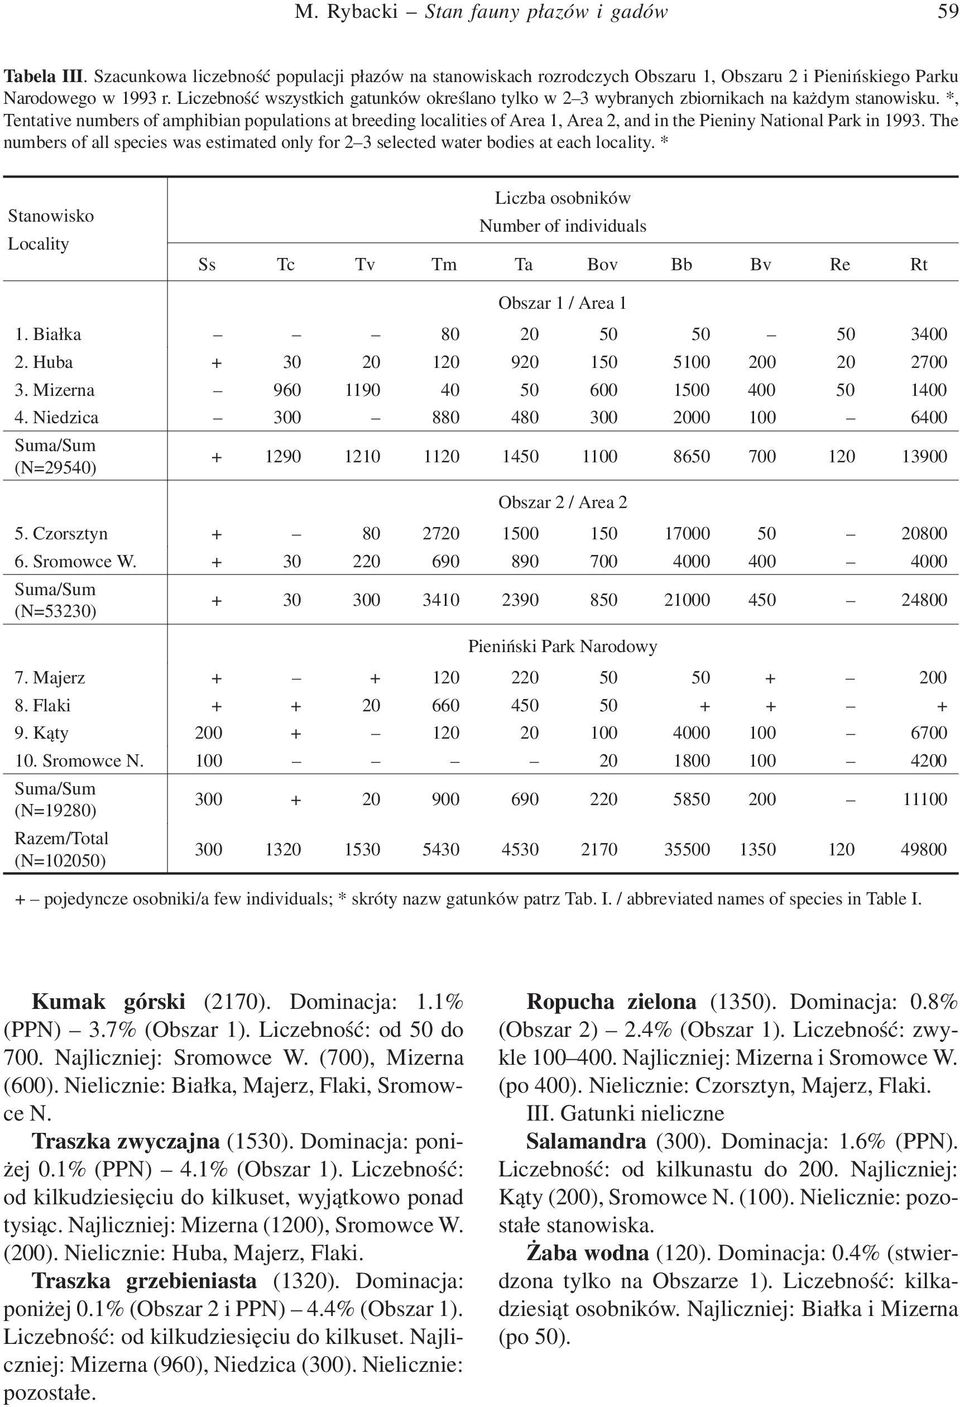 *, Tentative numbers of amphibian populations at breeding localities of Area 1, Area 2, and in the Pieniny National Park in 1993.